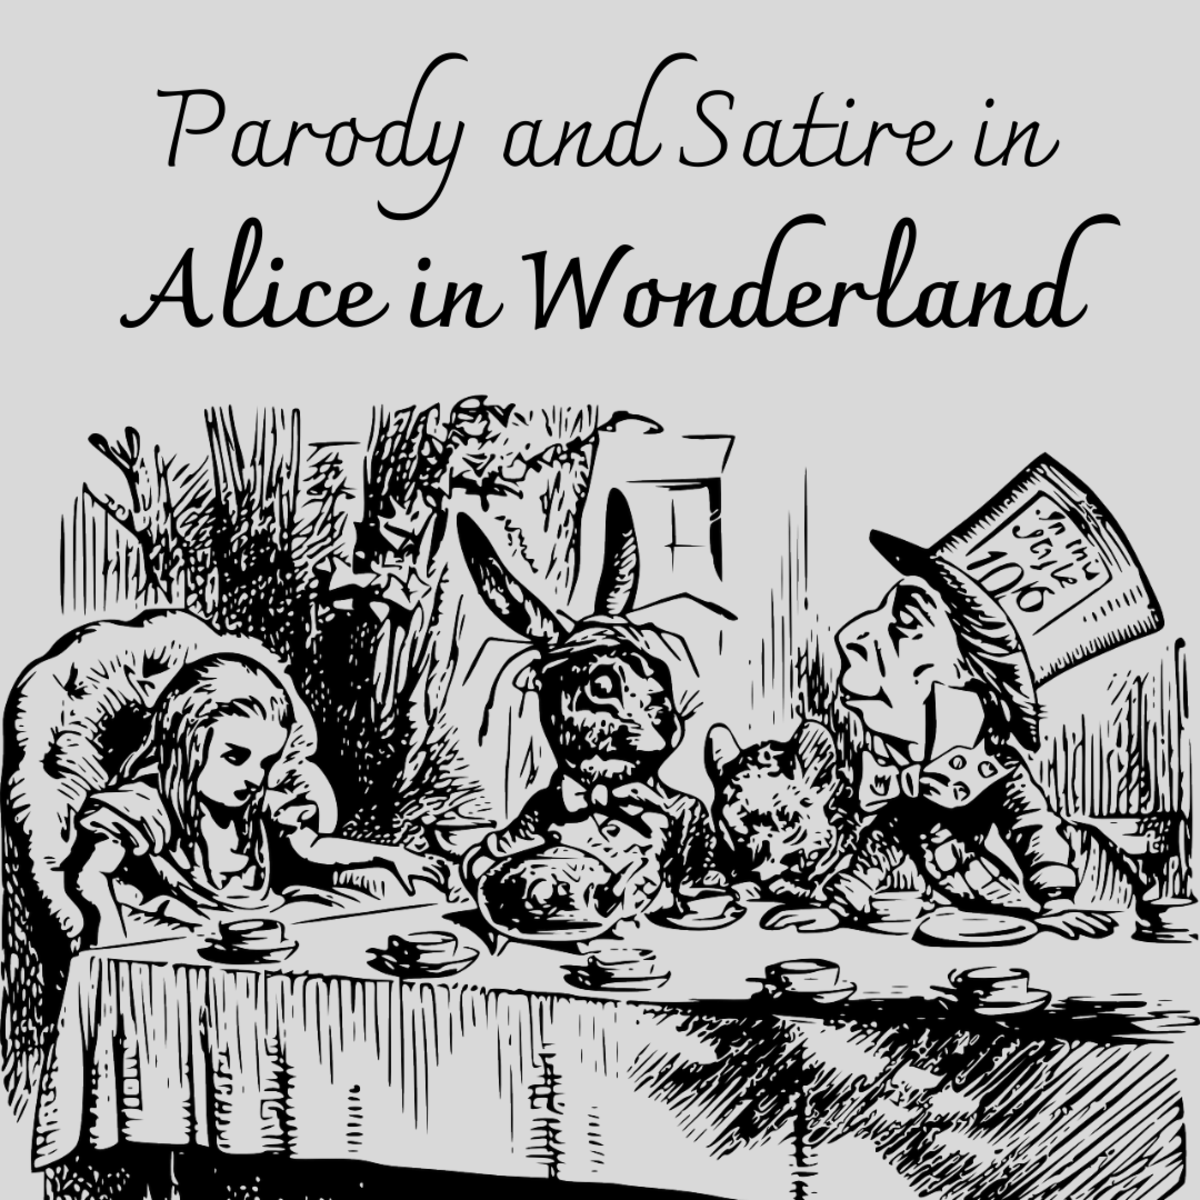 Parody, satire and puns are essential components of what makes the wonderland of Lewis Carroll's Alice books so magical and mystifying. 